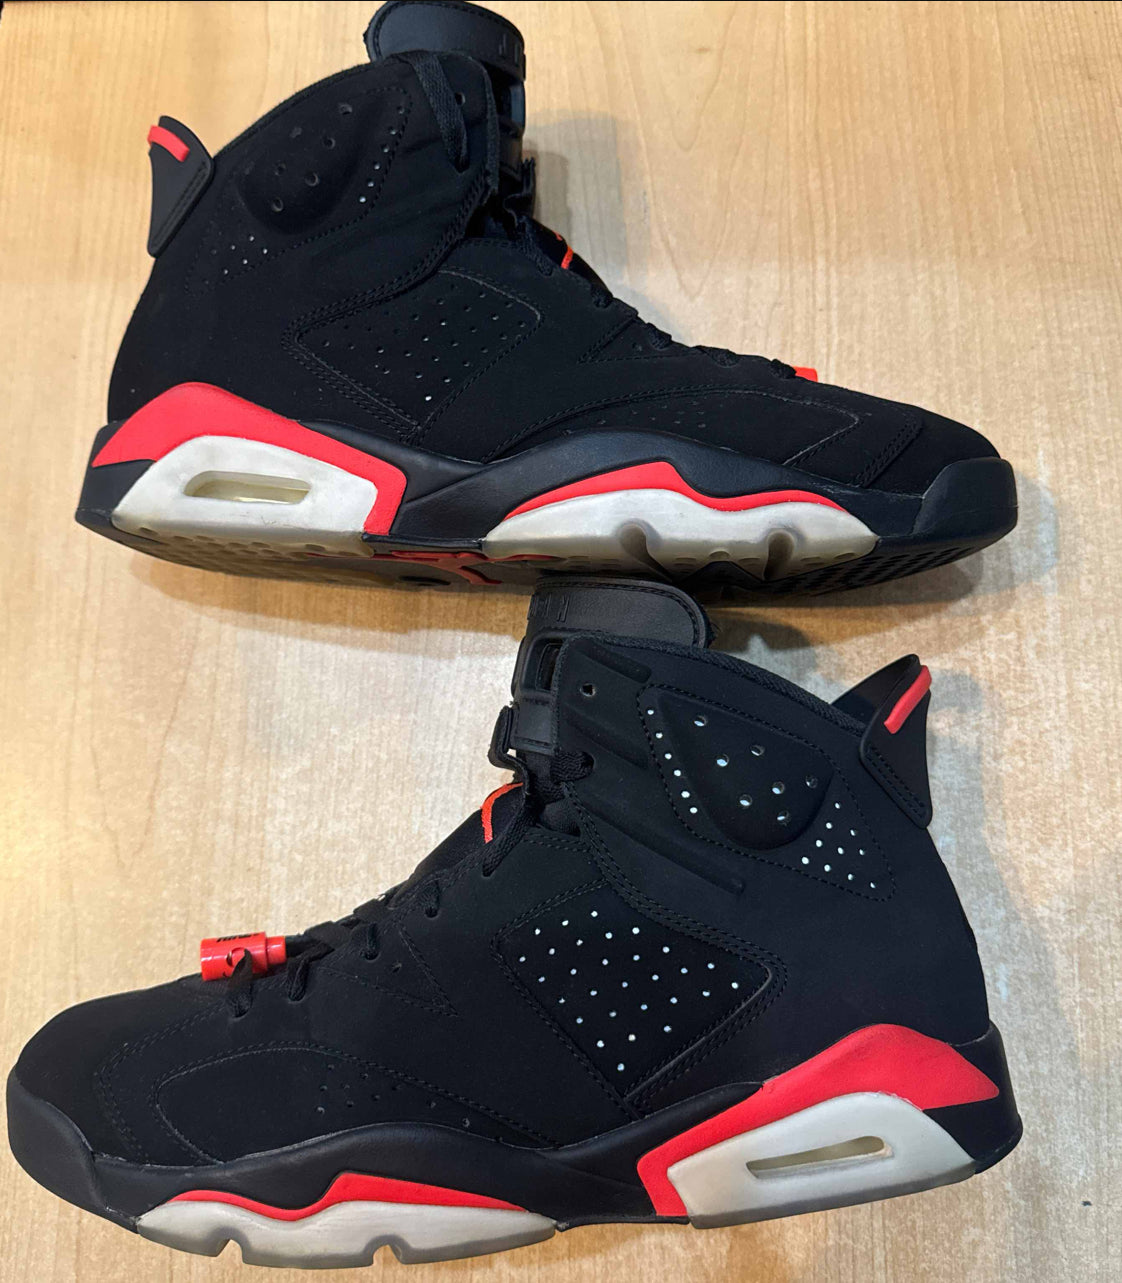 Infrared 6s Size 10.5